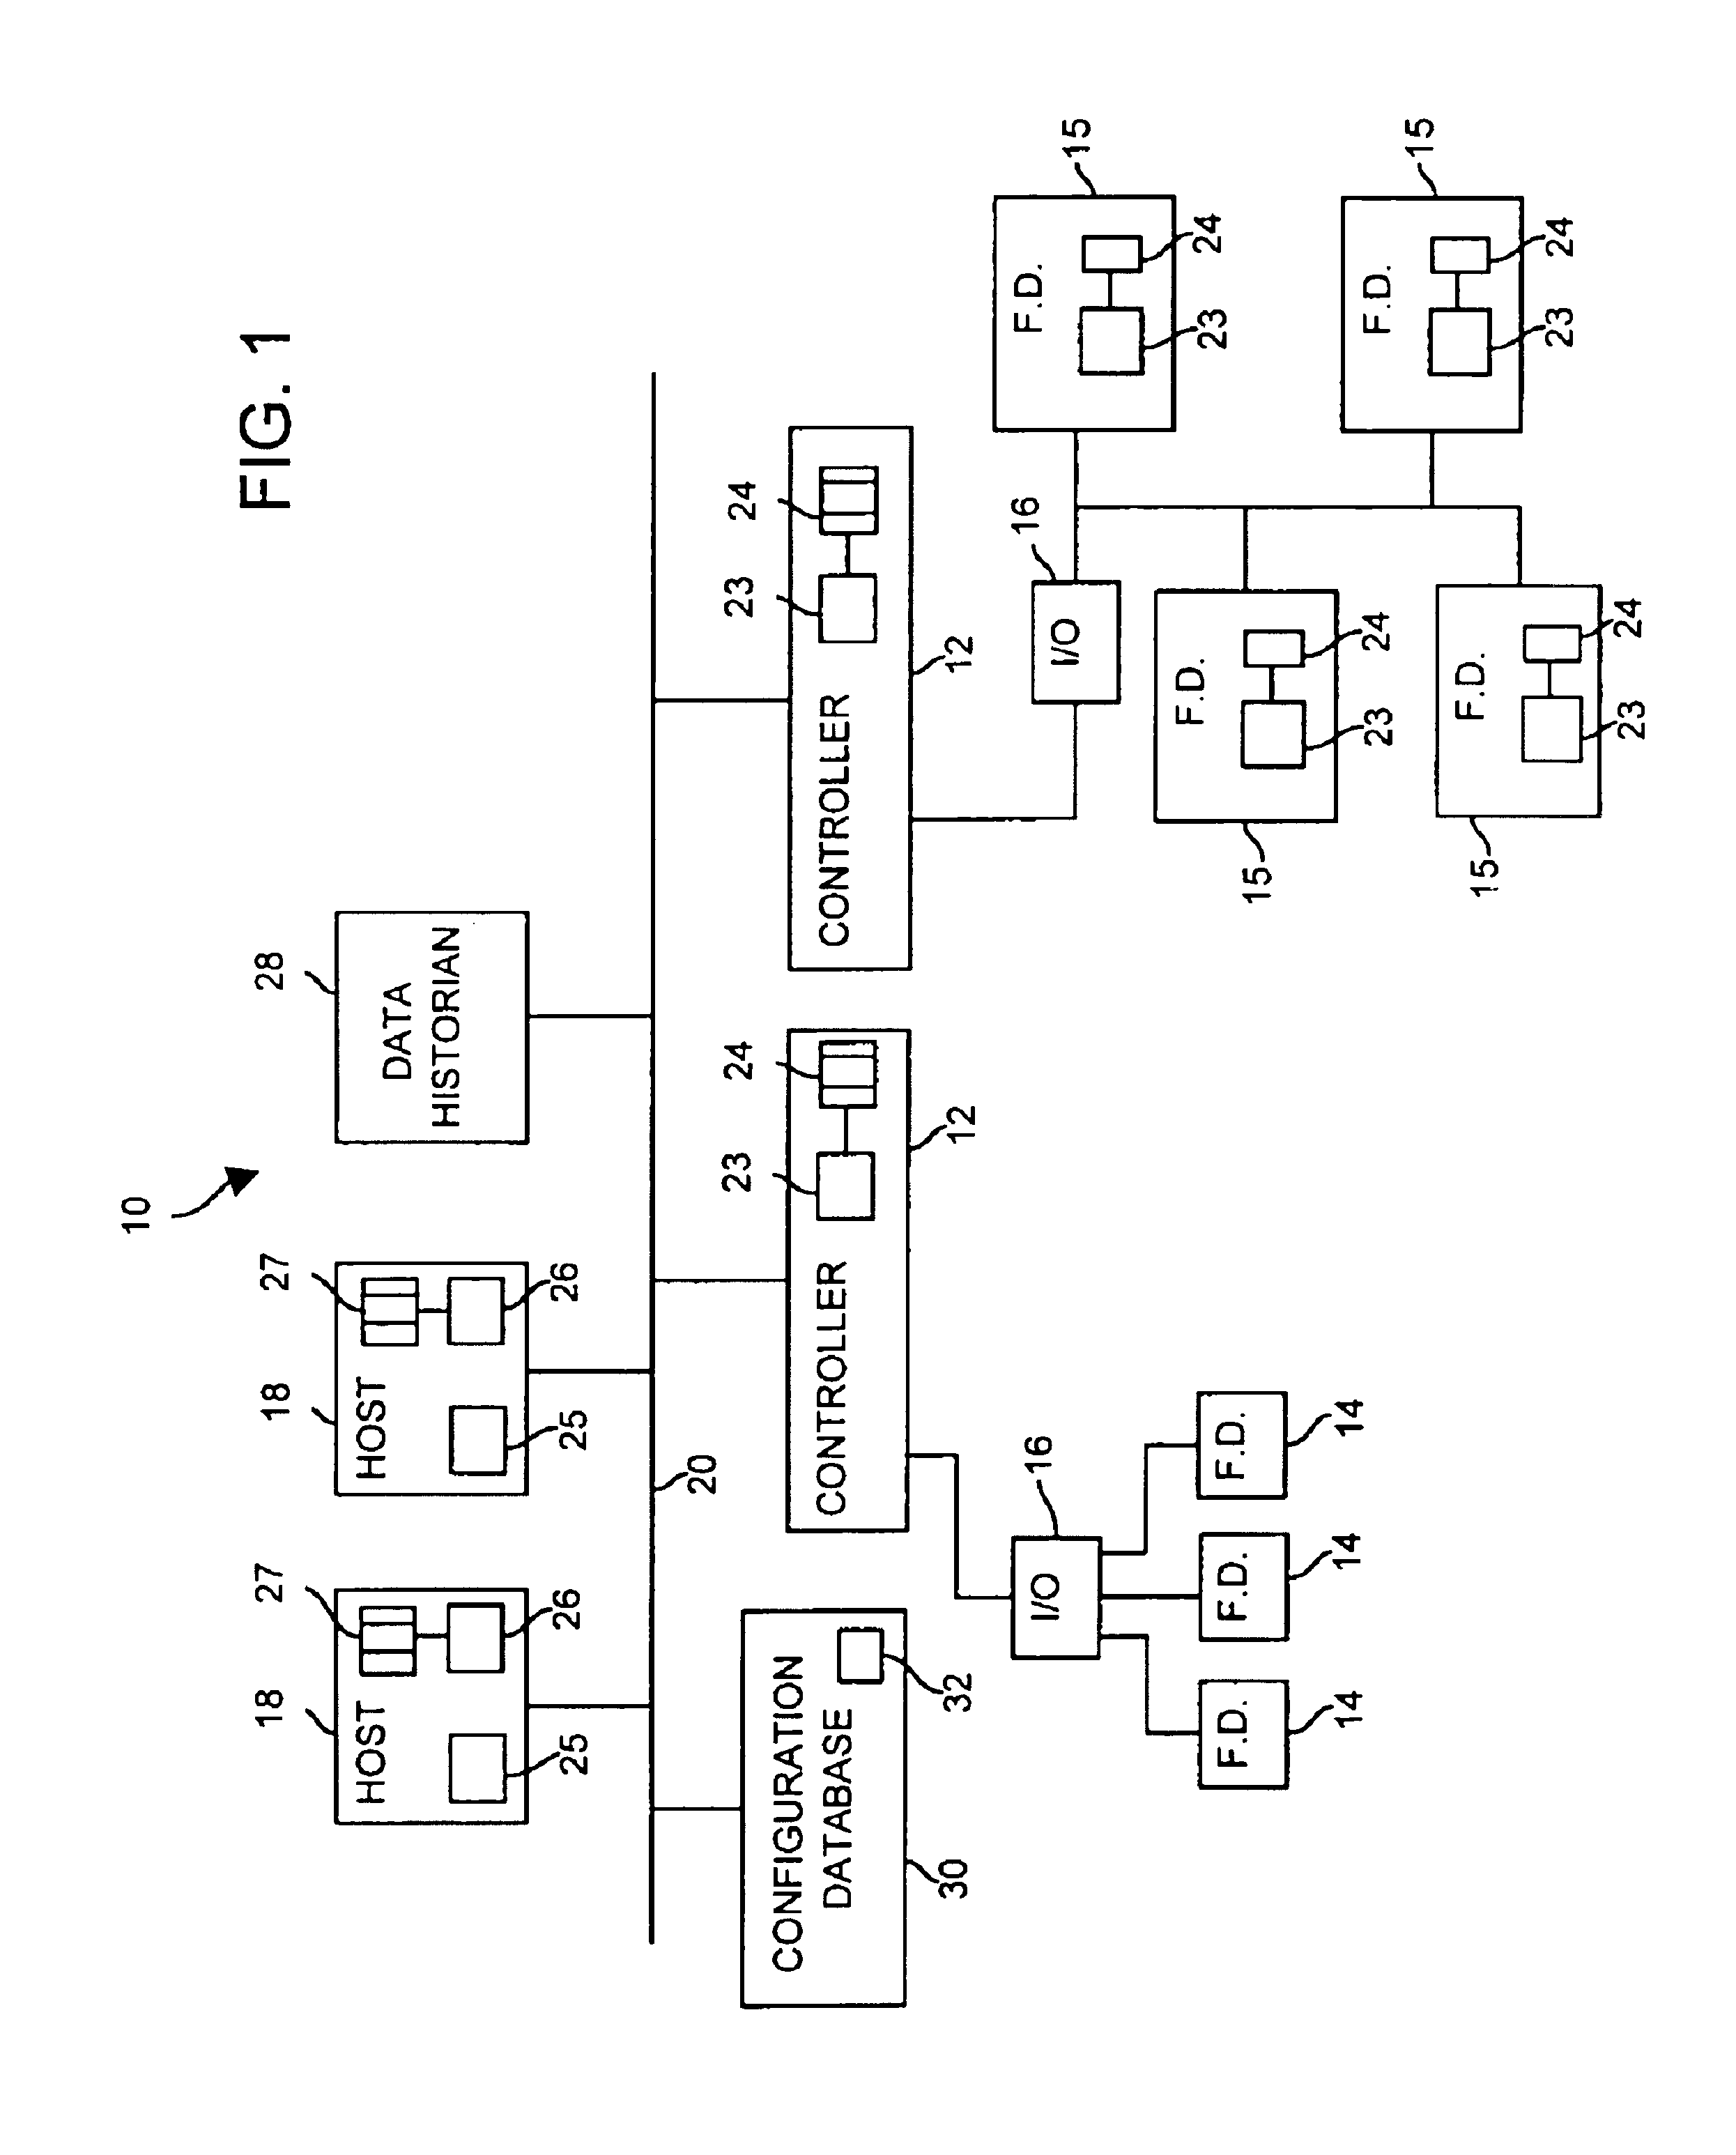 Downloadable code in a distributed process control system